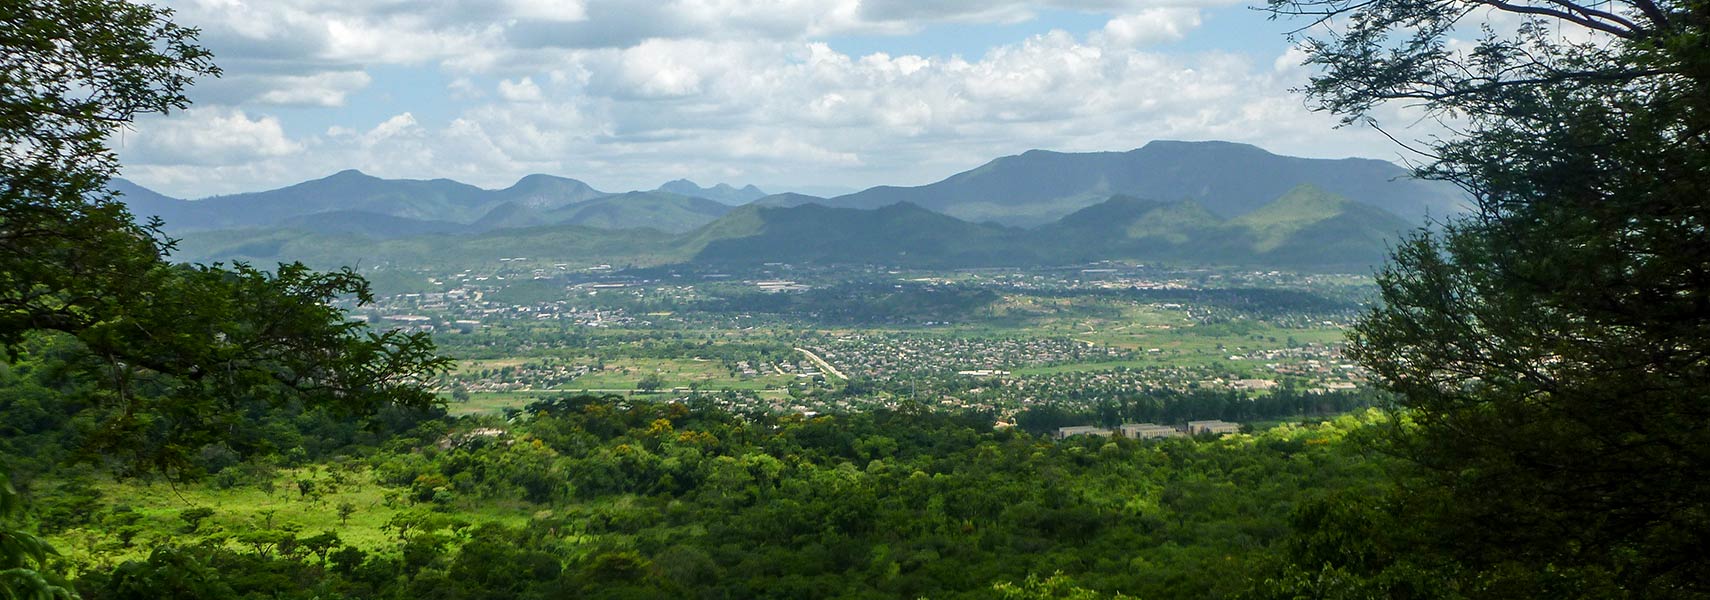 Mutare Area seen from Christmas Pass